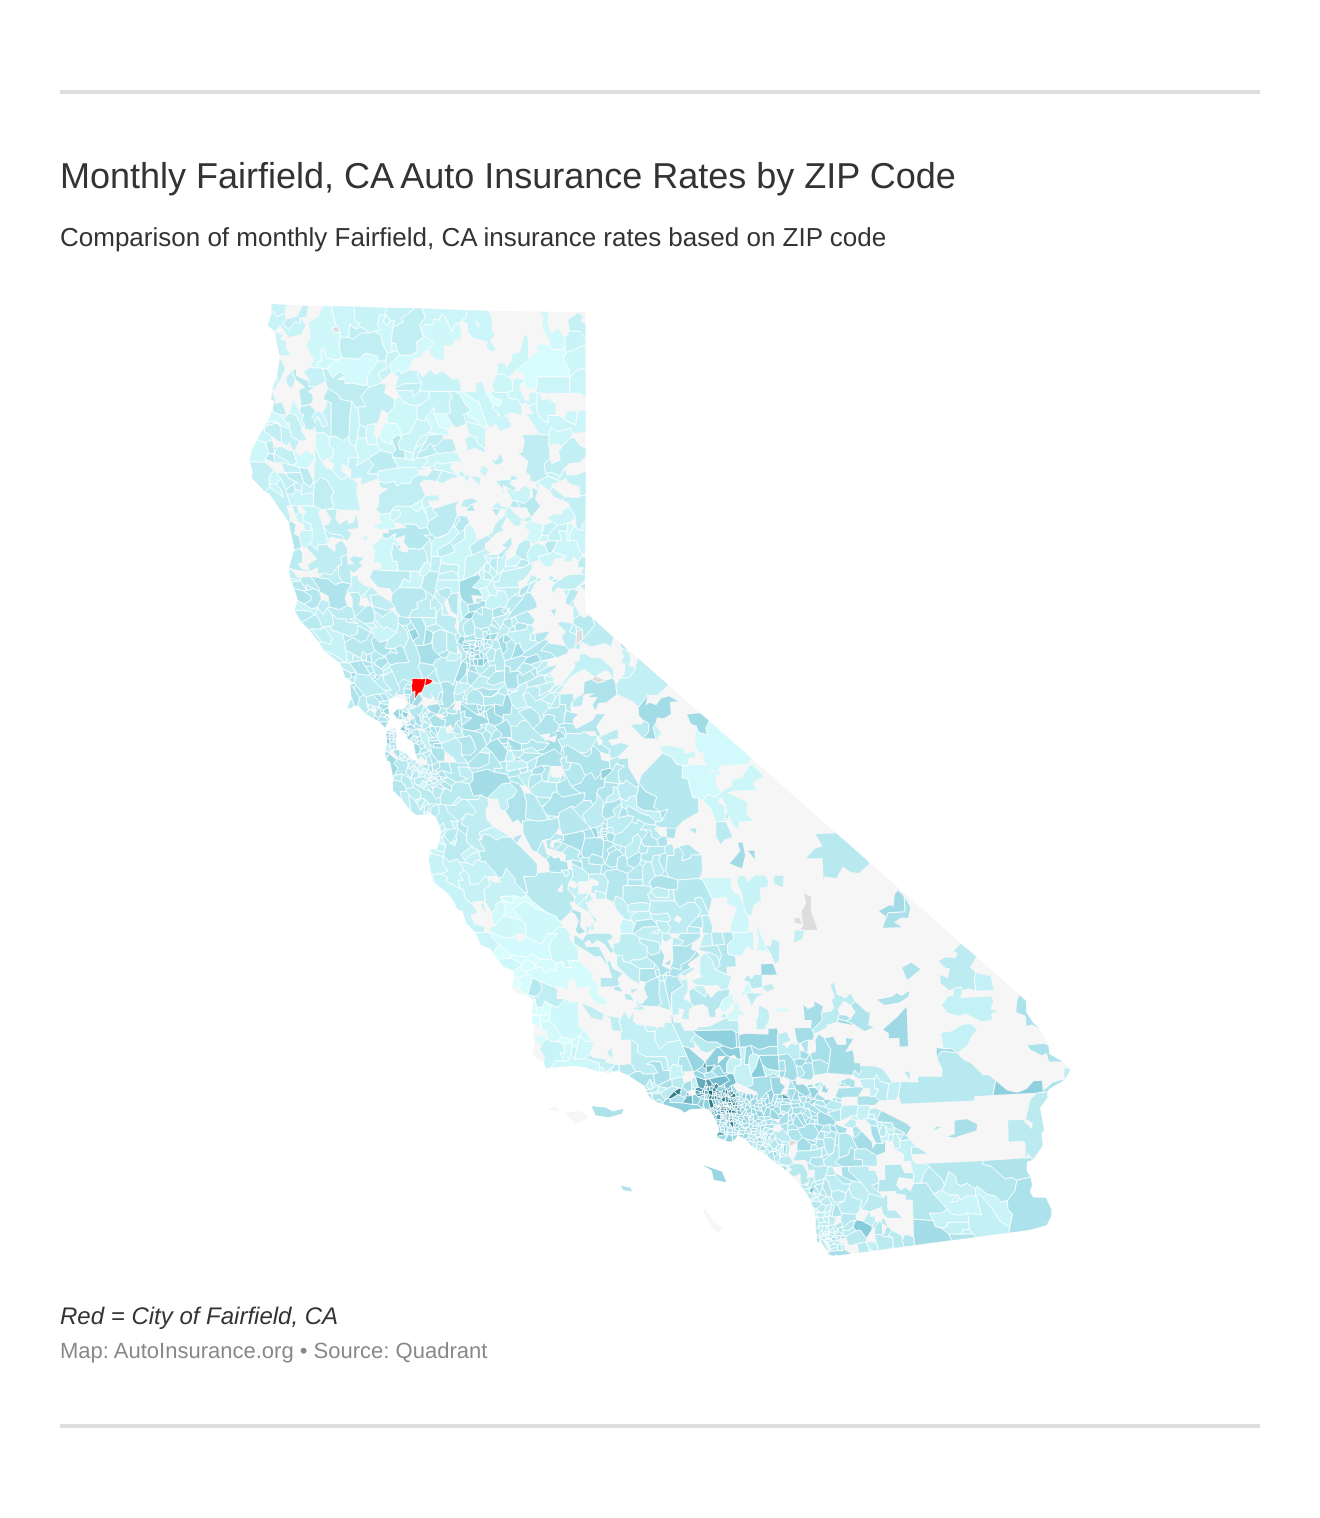 Monthly Fairfield, CA Auto Insurance Rates by ZIP Code